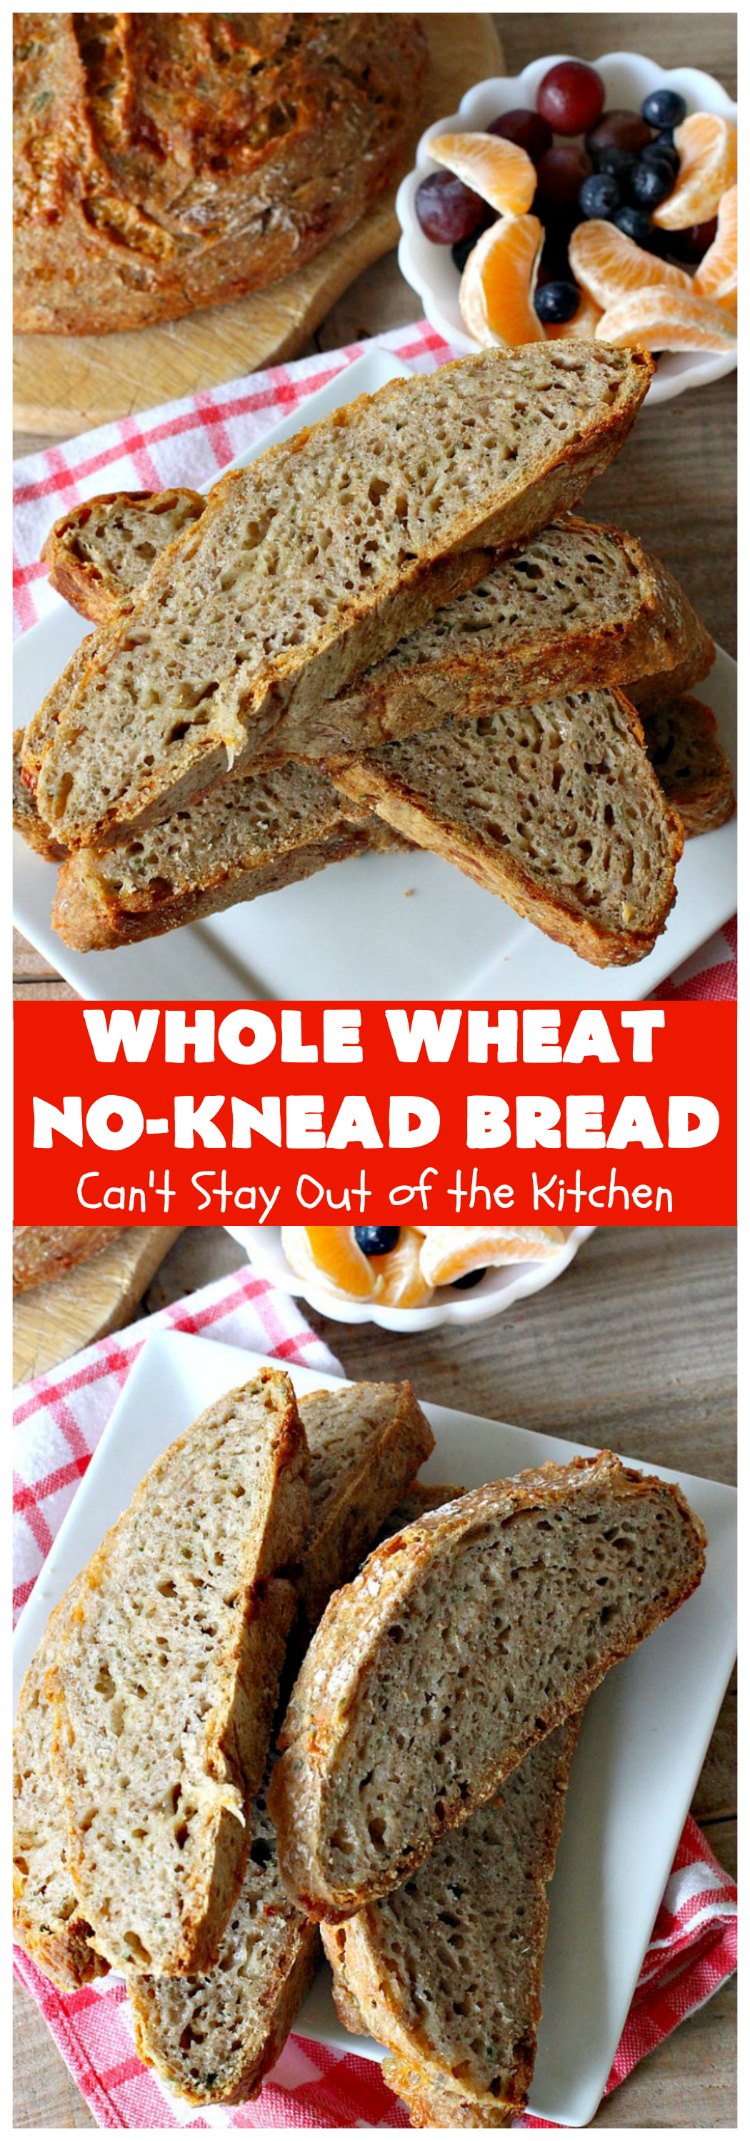 Whole Wheat No-Knead Bread | Can't Stay Out of the Kitchen | fantastic #NoKneadBread using #WheatFlour, #ProvoloneCheese & #SevenGrainCereal. Incredibly easy #HomemadeBread #recipe. #bread #ArtisanBread